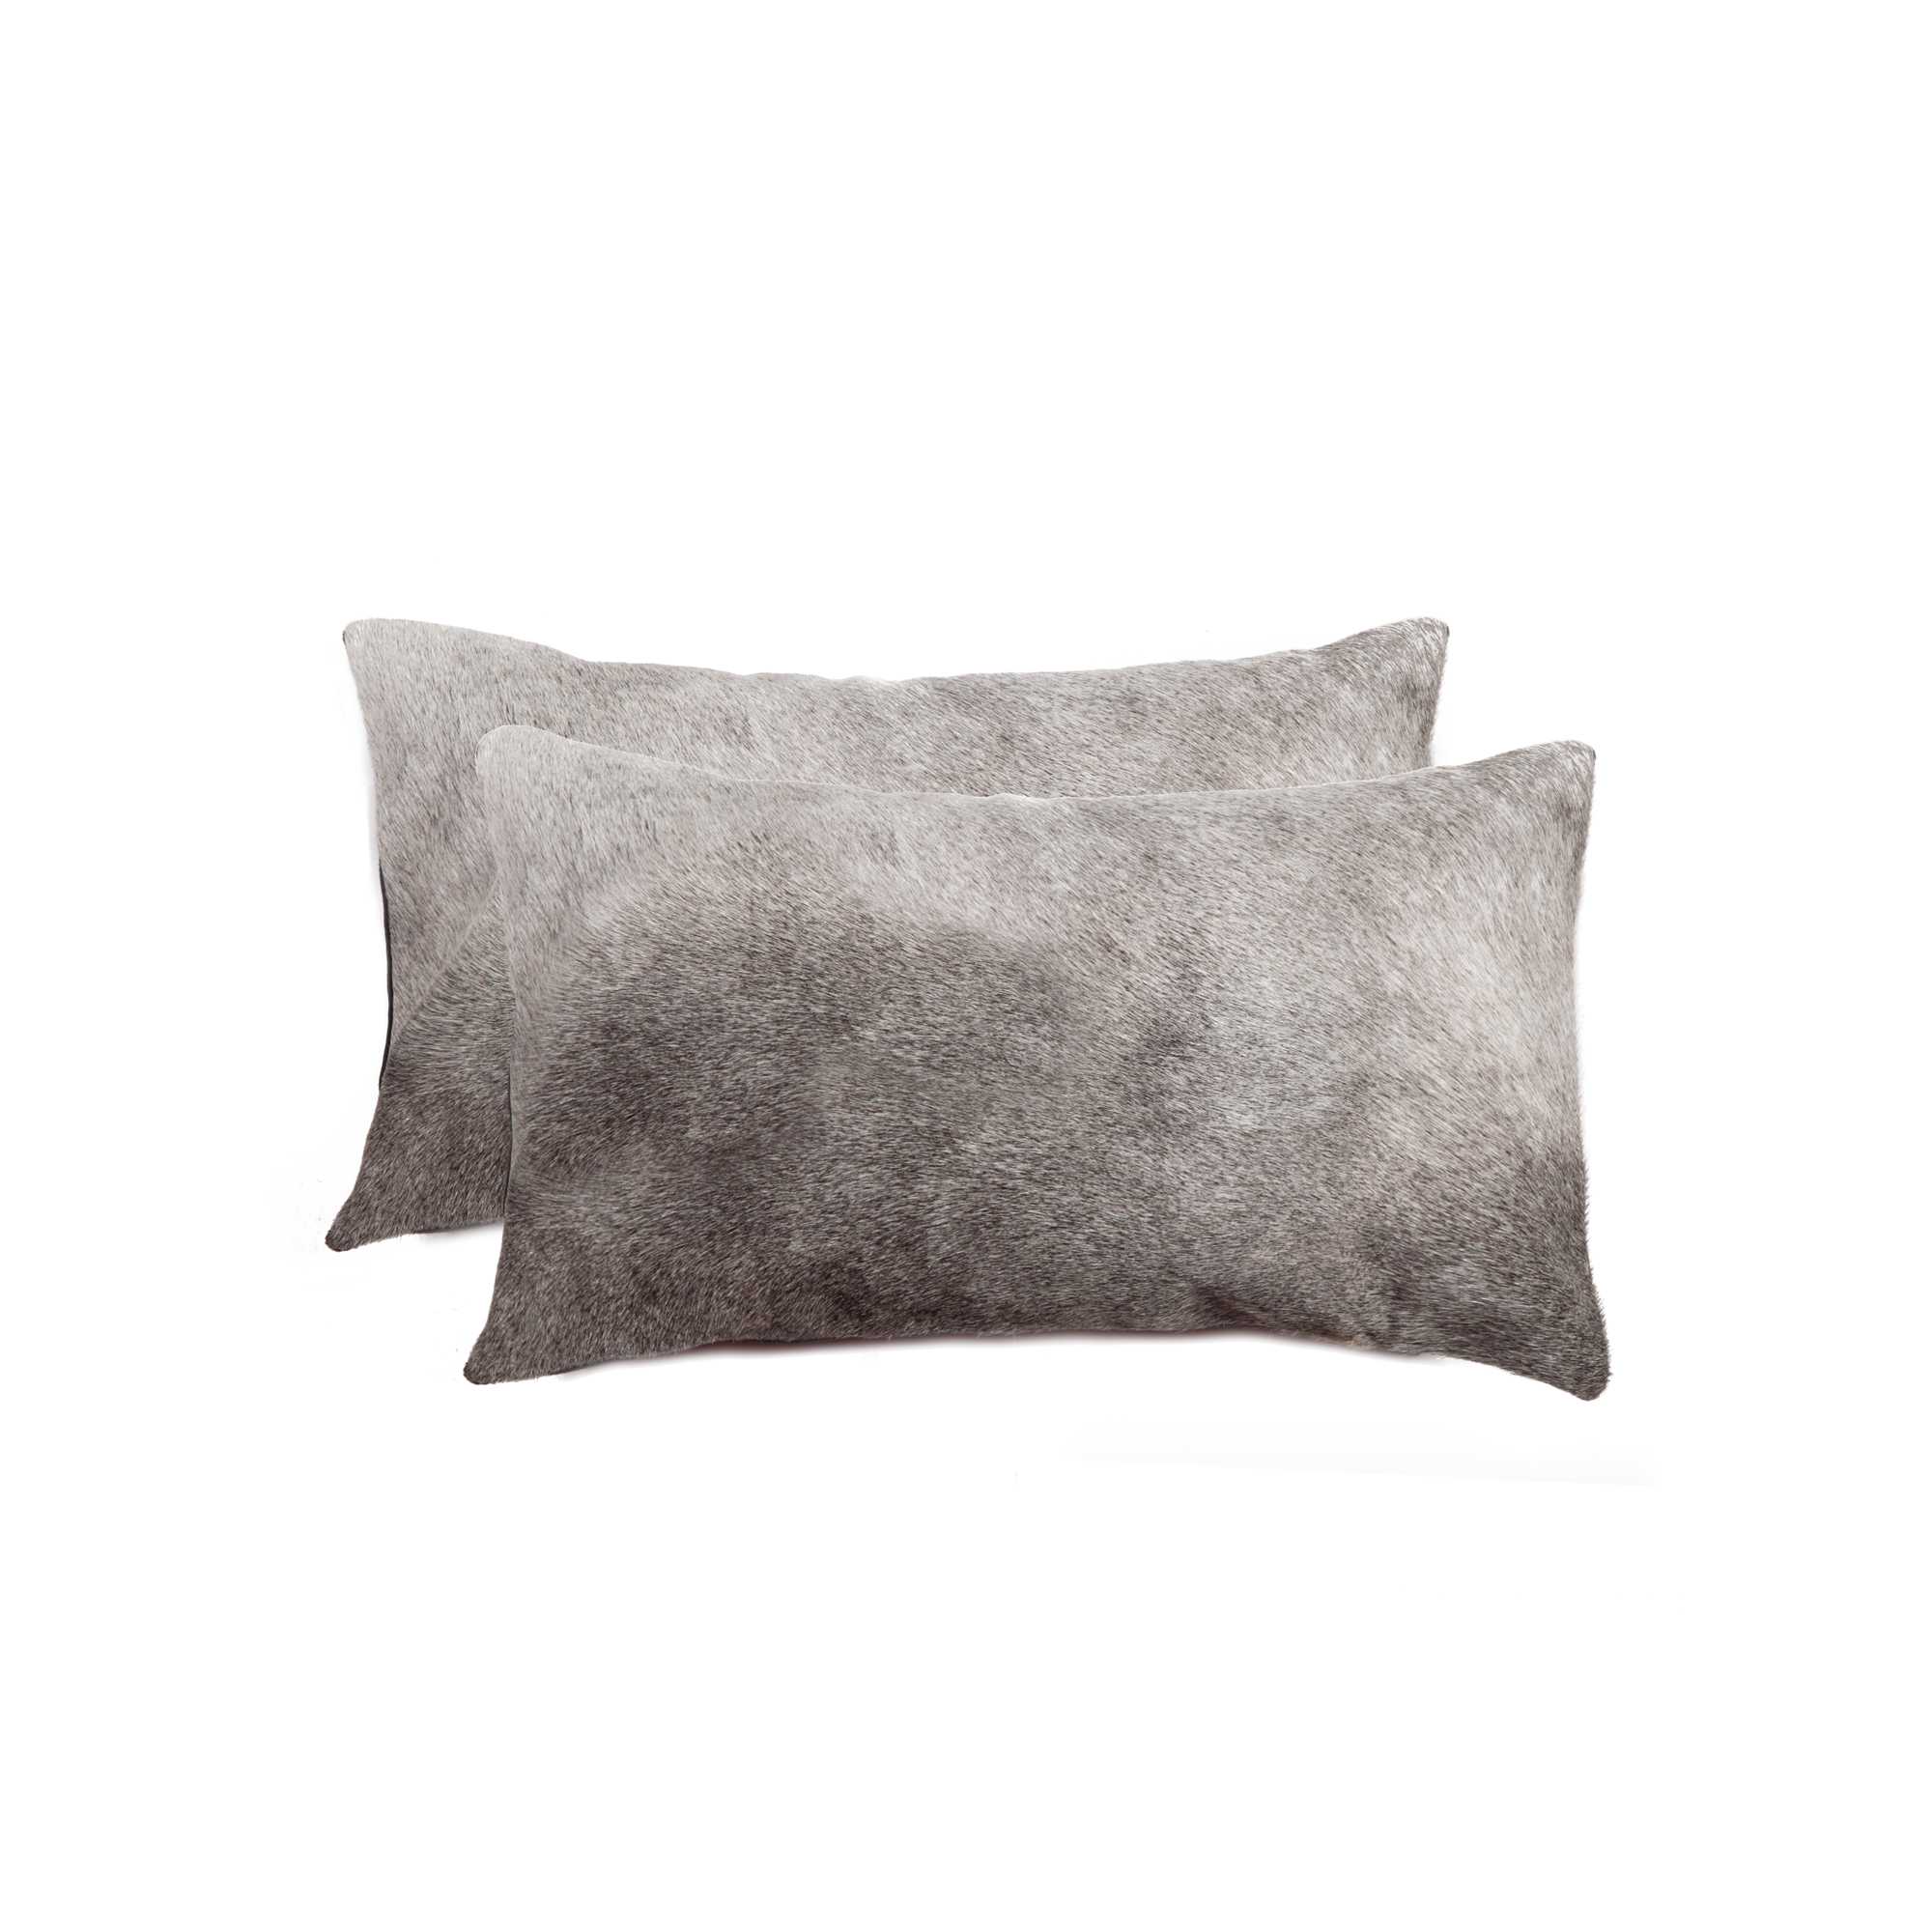 12" x 20" x 5" Gray, Cowhide - Pillow 2-Pack